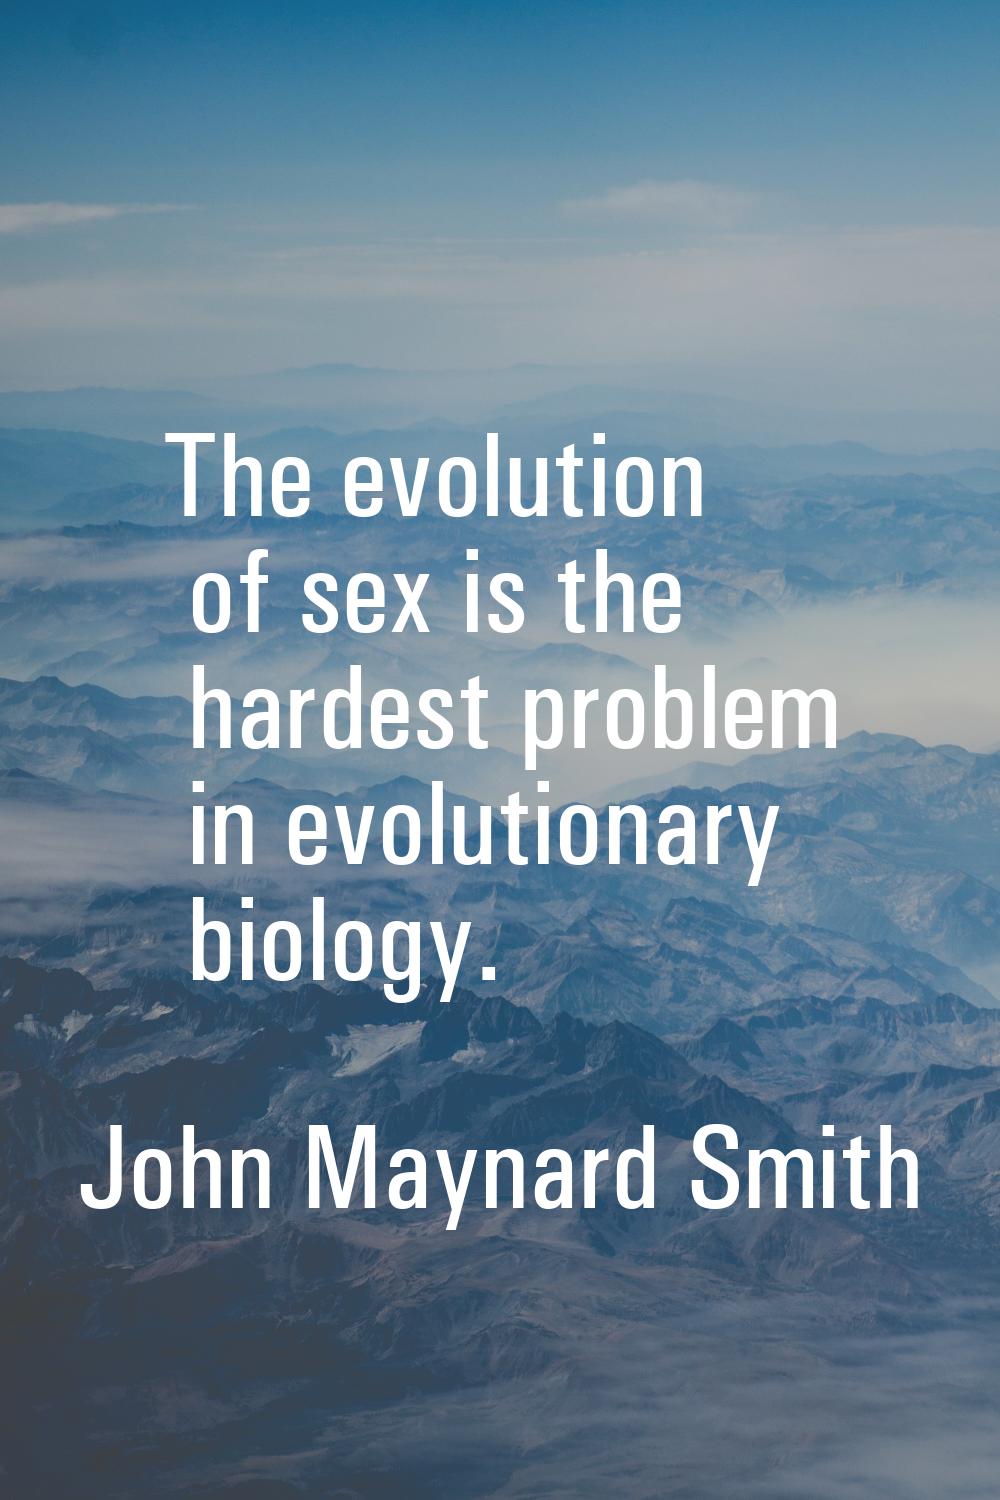 The evolution of sex is the hardest problem in evolutionary biology.